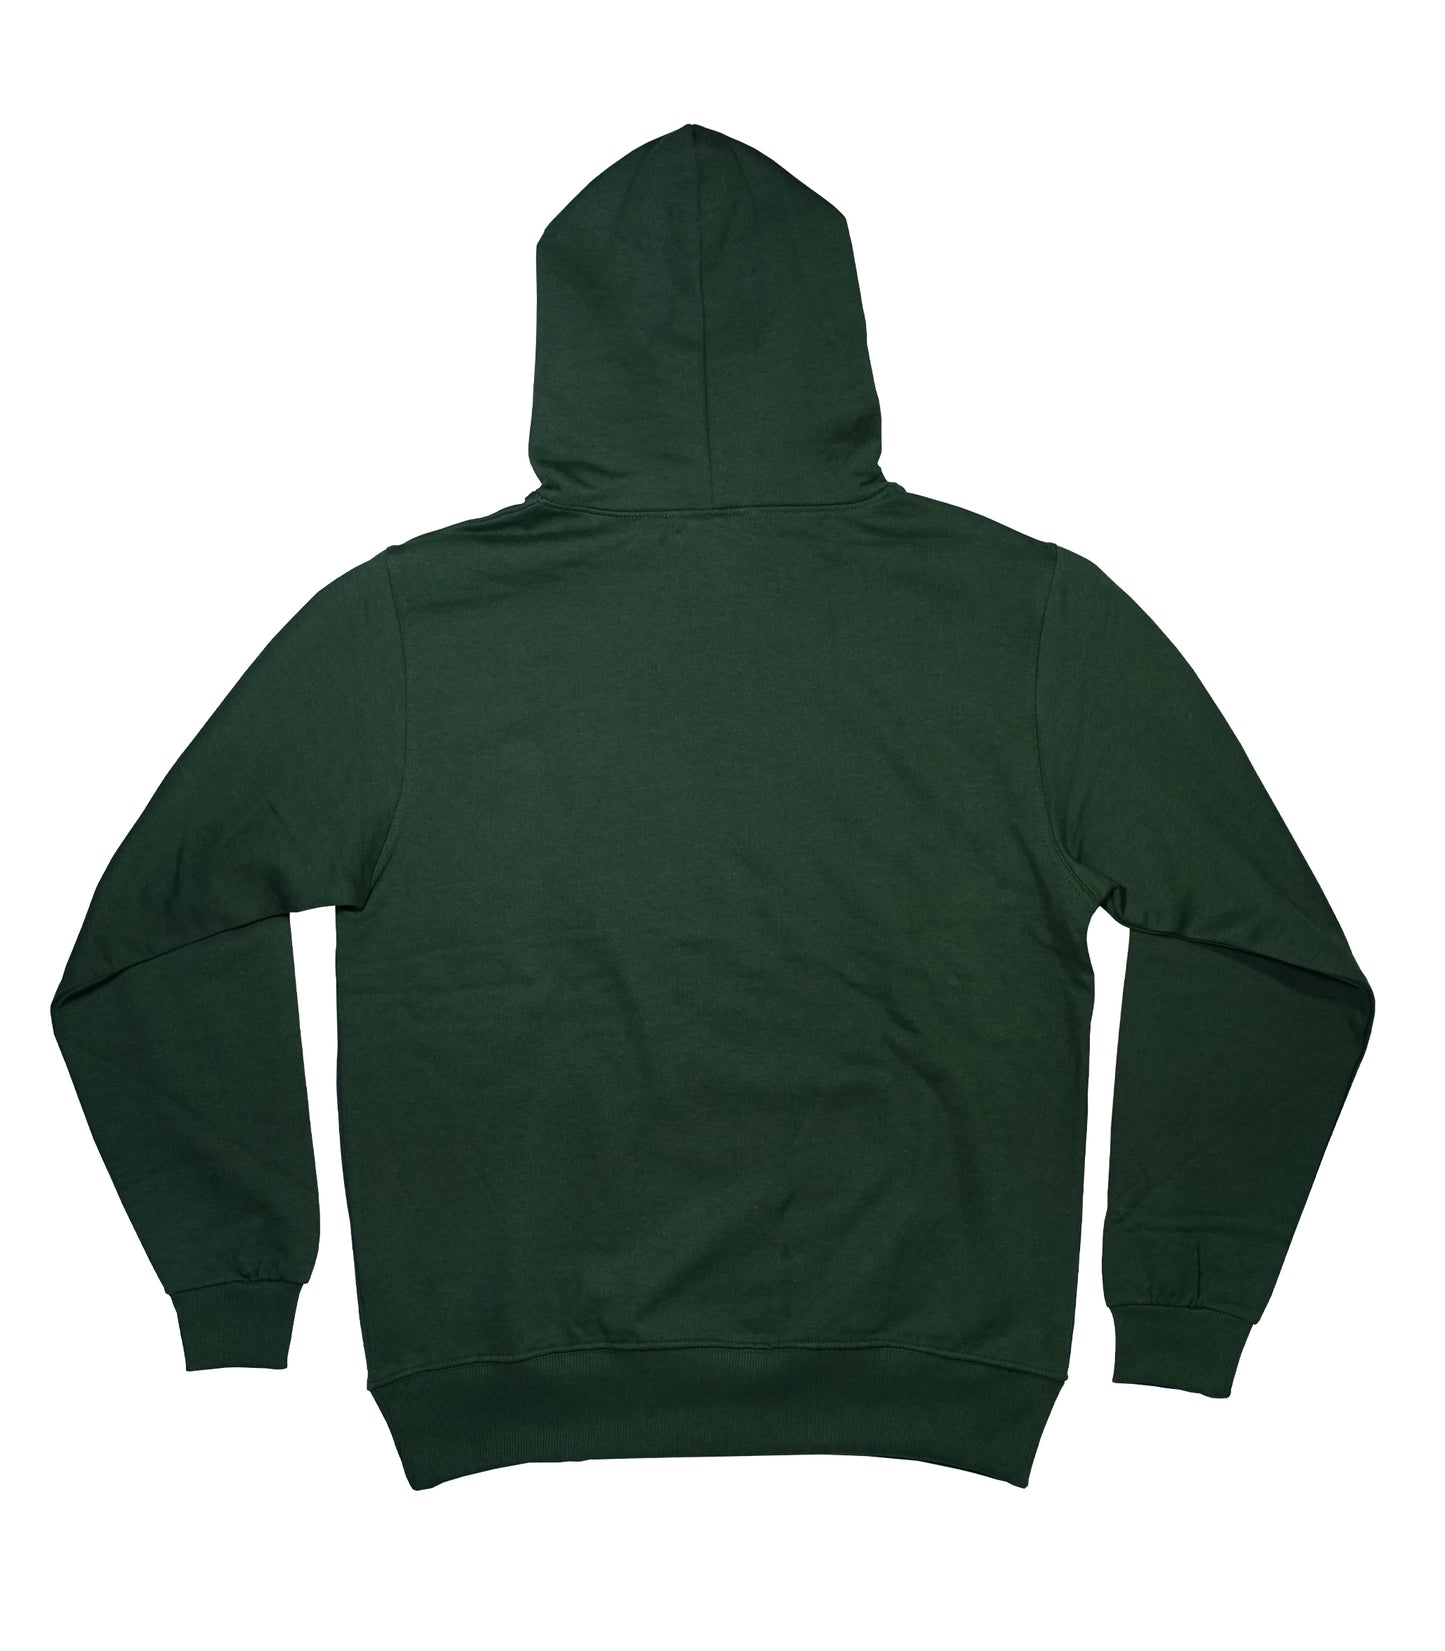 Clipped hoodie